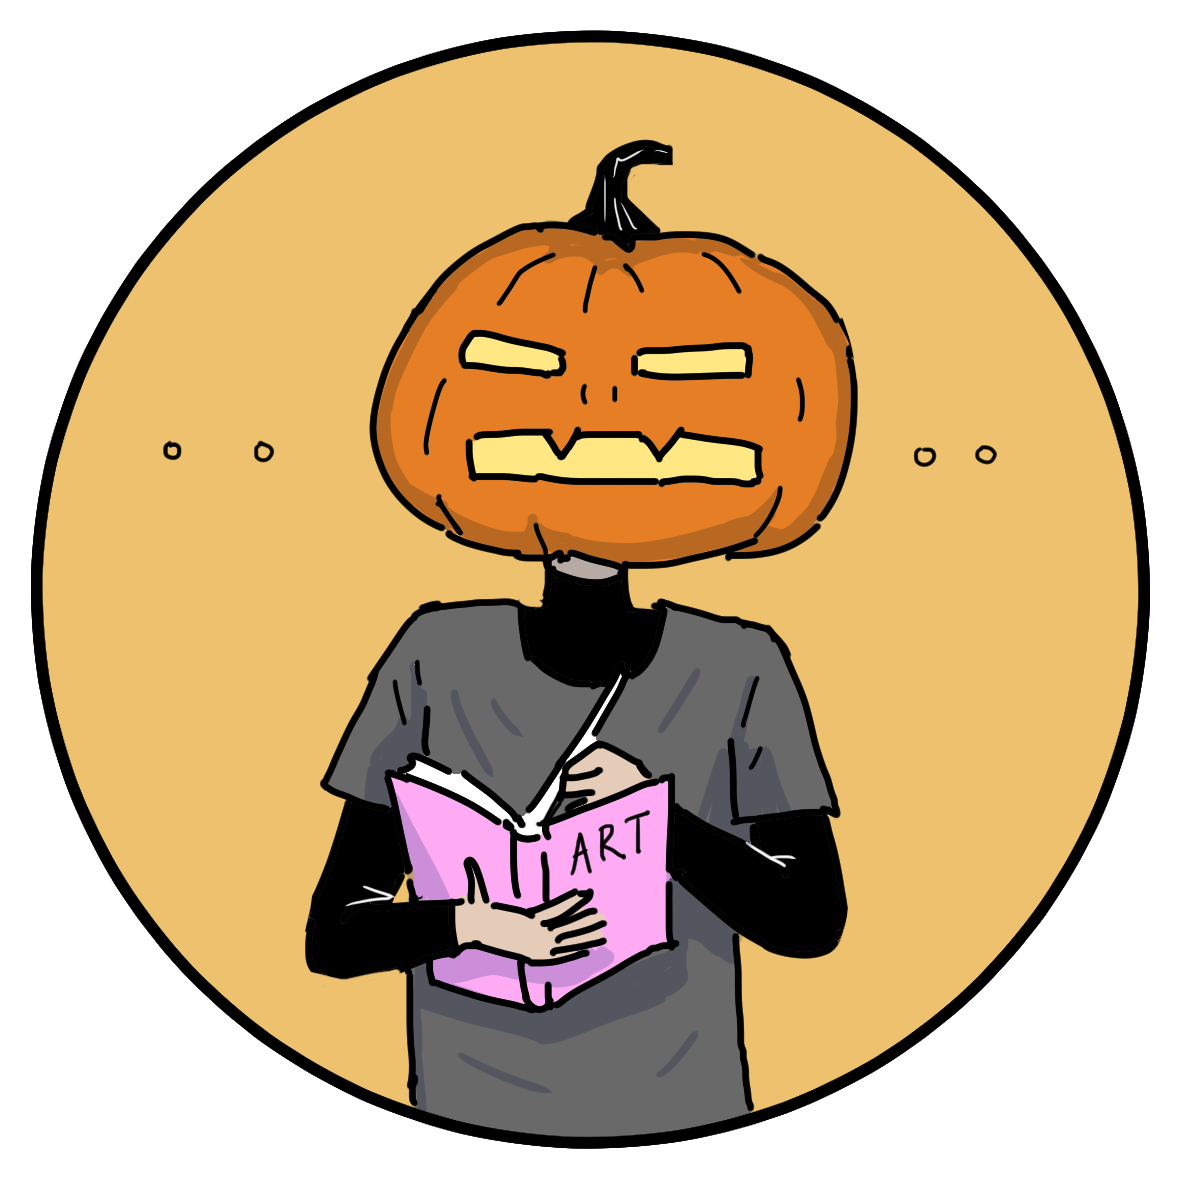 KTU_icons_Halloween2020_001.png